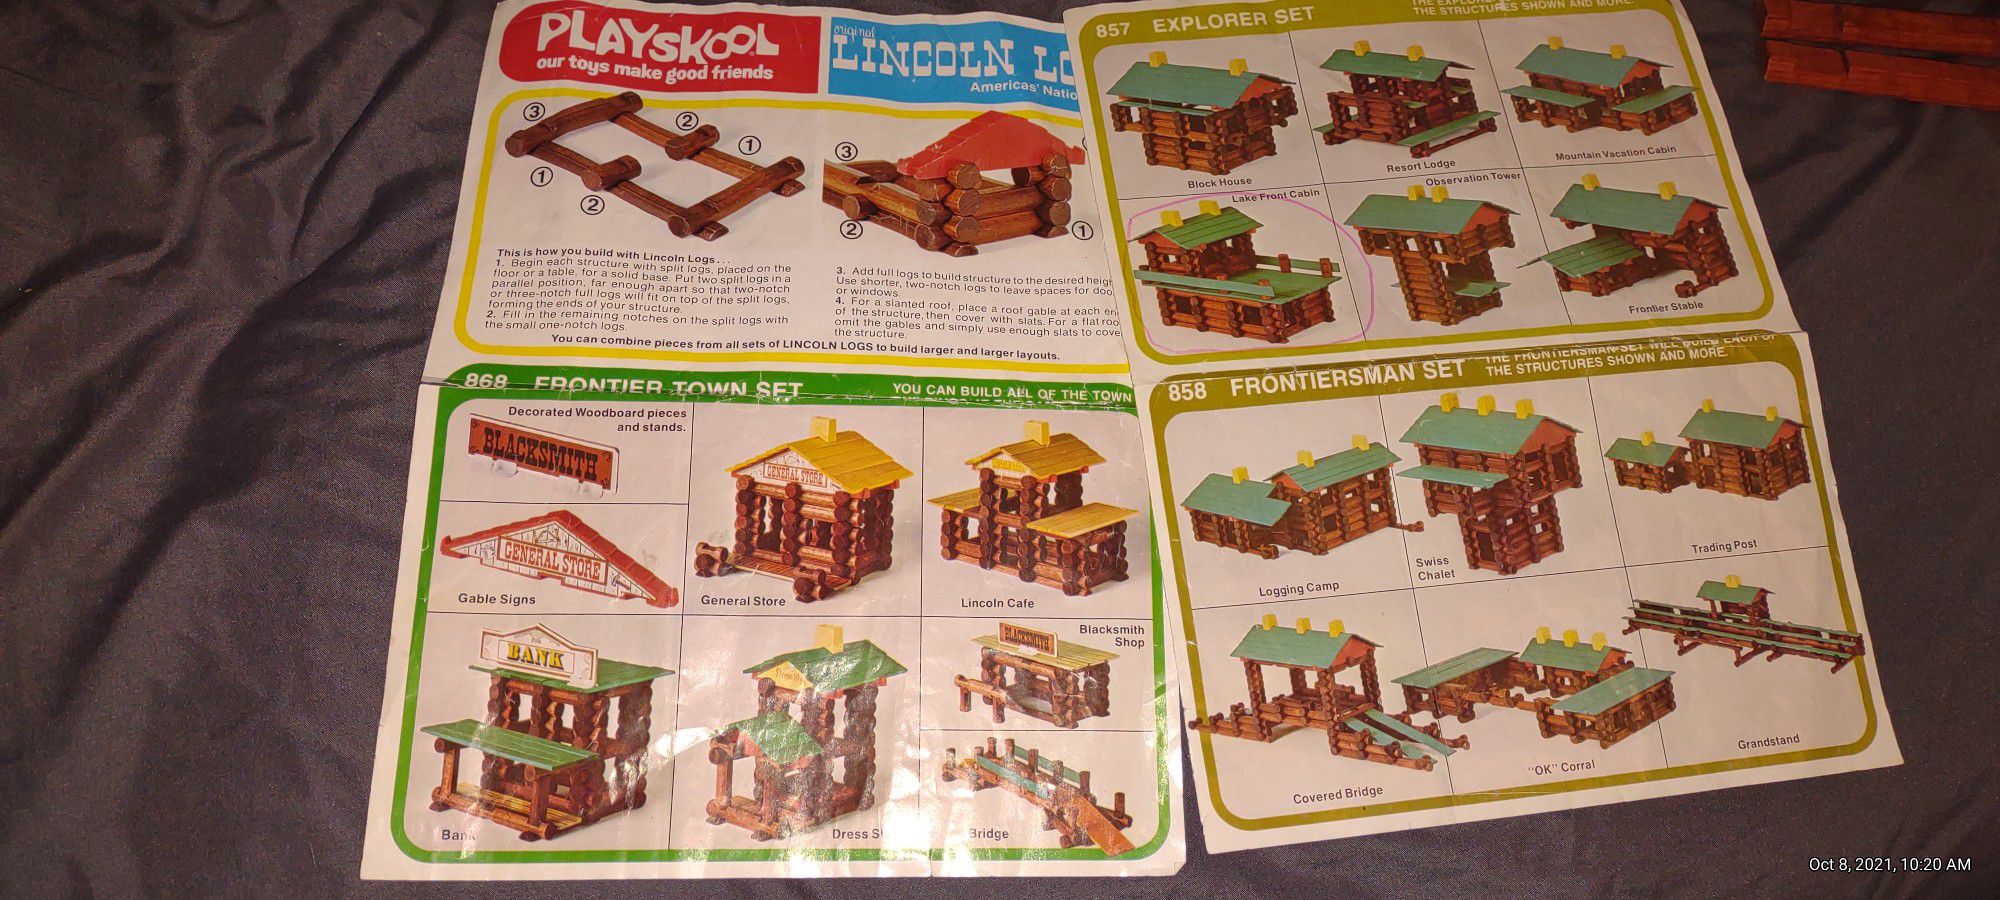 1979 Lincoln Logs.  All Pieces Are There